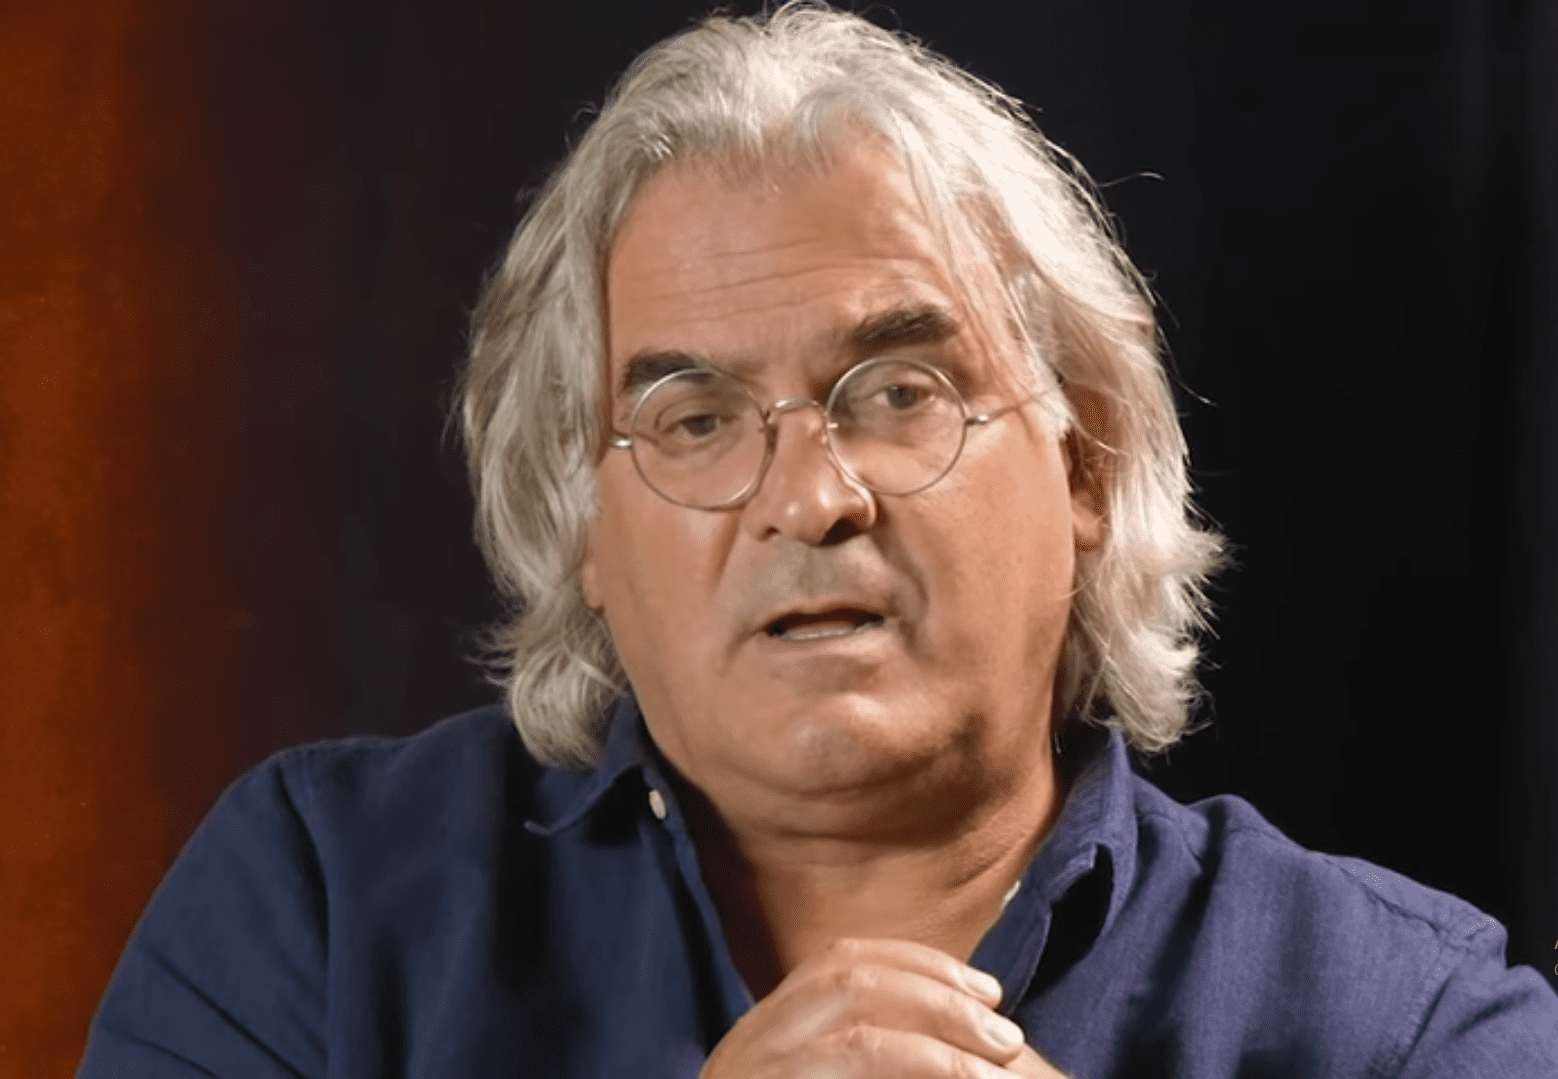 Paul Greengrass on Behind The Lens with Pete Hammond. | YouTube/ DeadlineHollywood